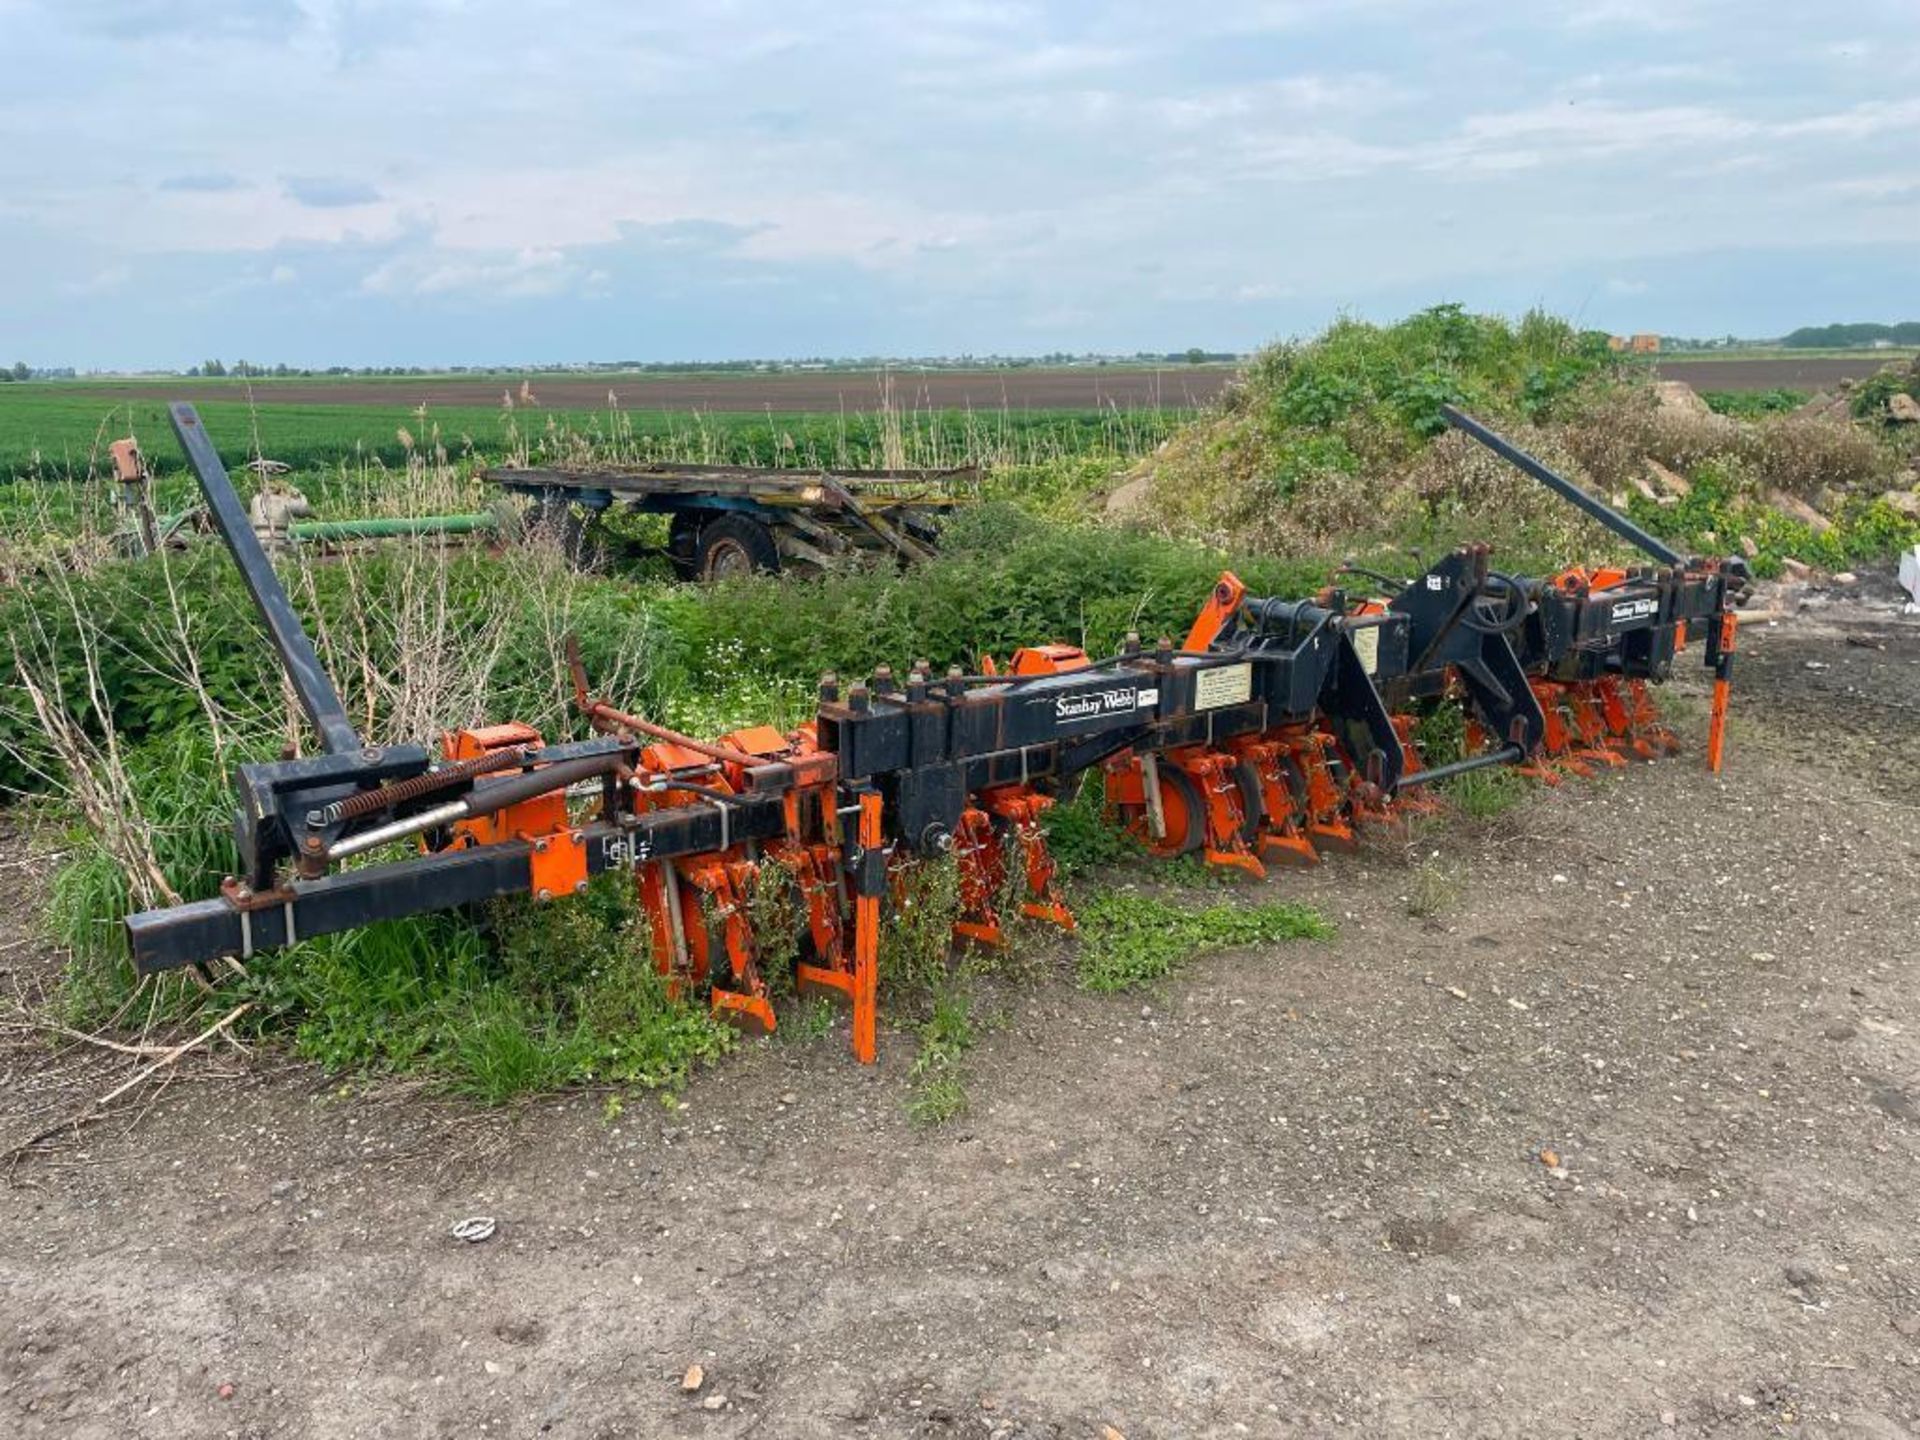 Stanhay Rallye 3bed/15row onion drill hydraulic folding, linkage mounted - Image 2 of 6